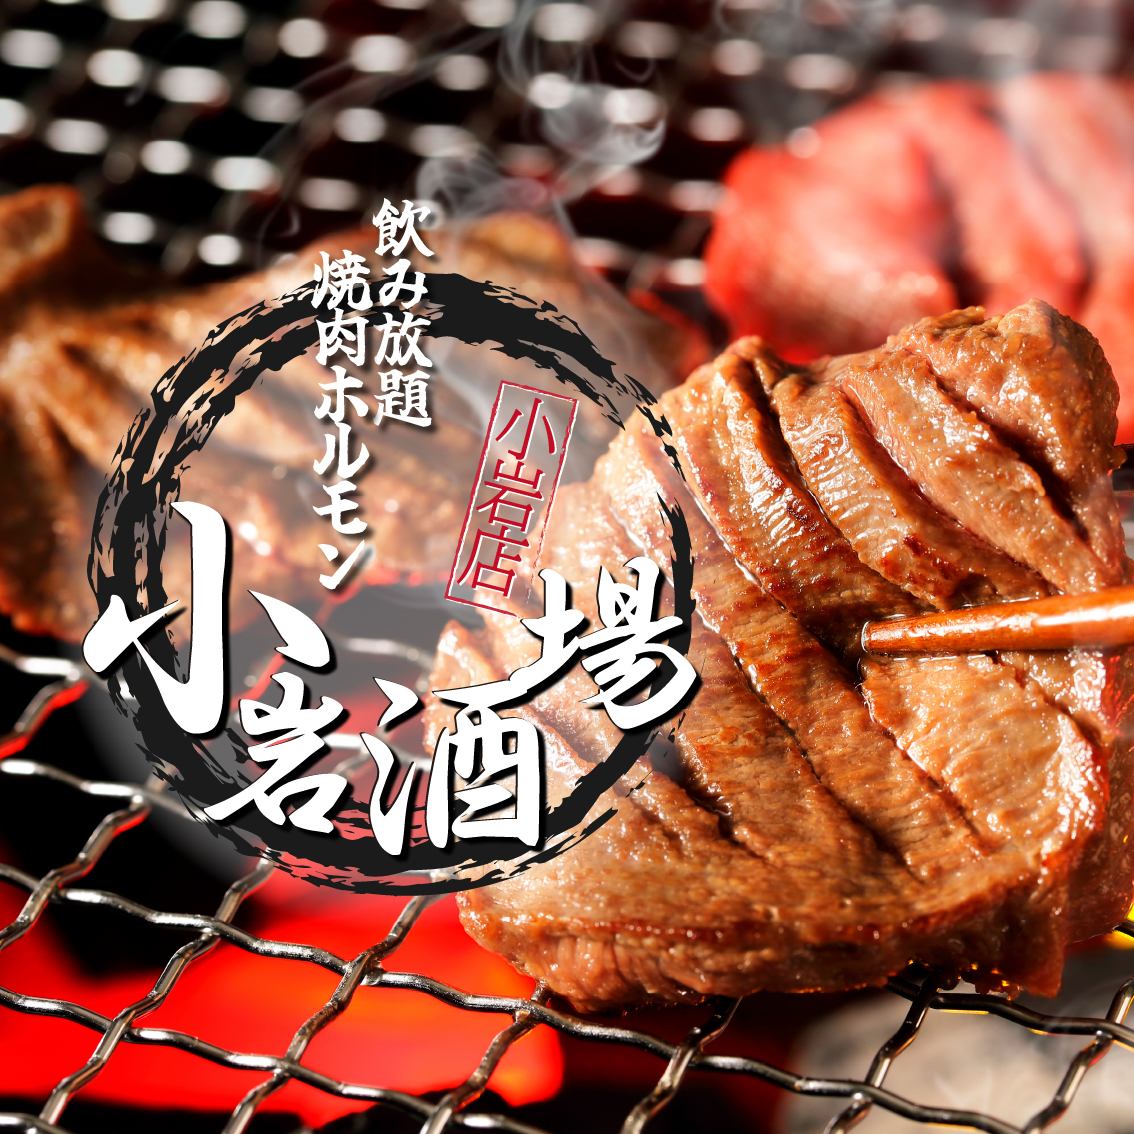 Confidence in meat quality and price♪ A restaurant where you can thoroughly enjoy meat